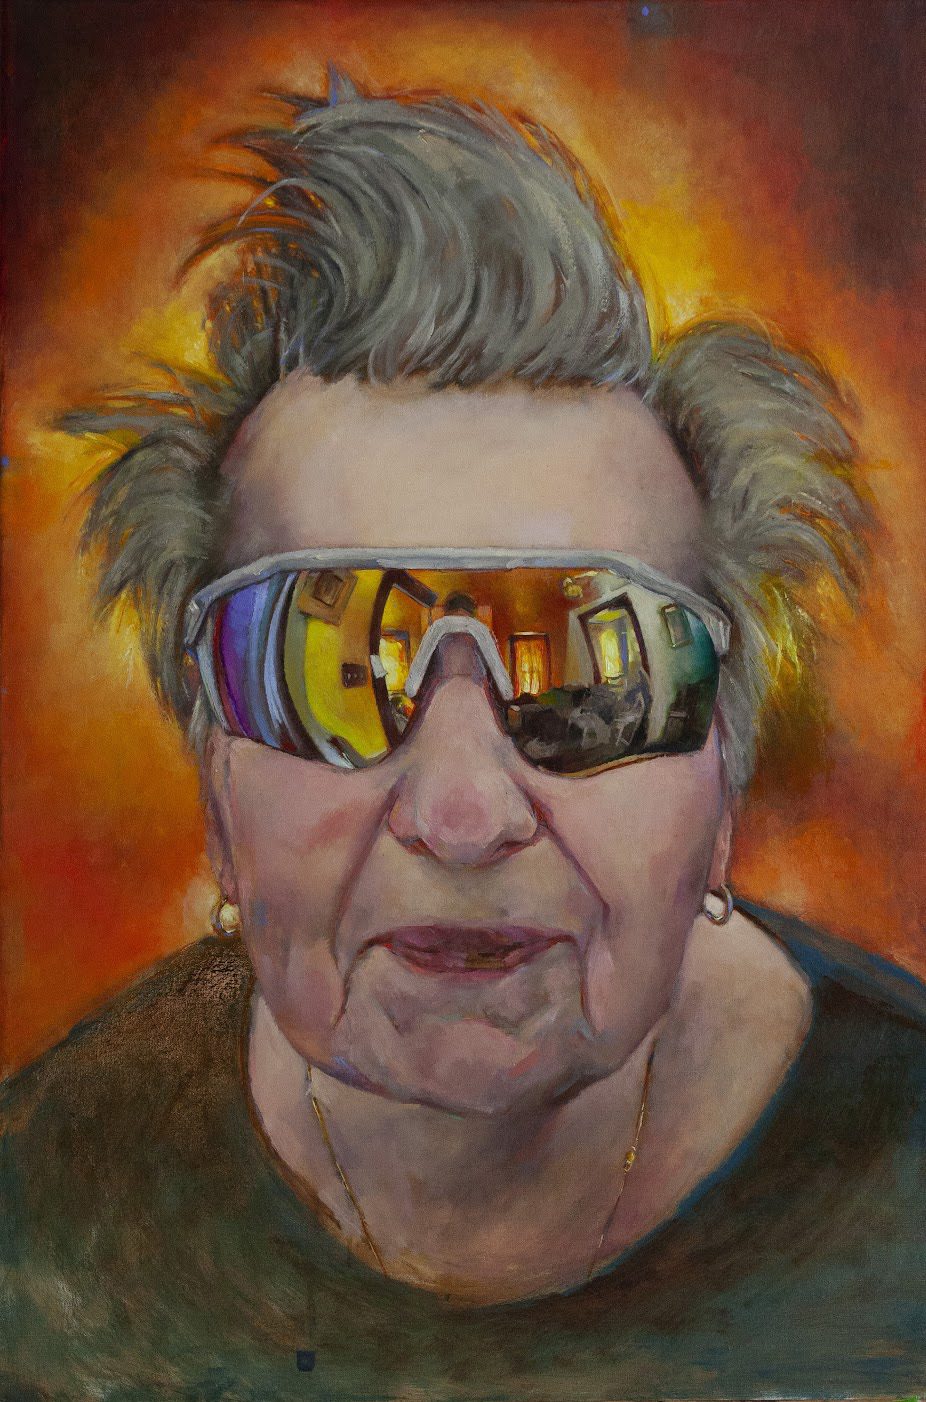 The painting is a large-scale portrait with a high chroma palette, showcasing Professor Zeggert's mother's living room, reflected in the glasses.